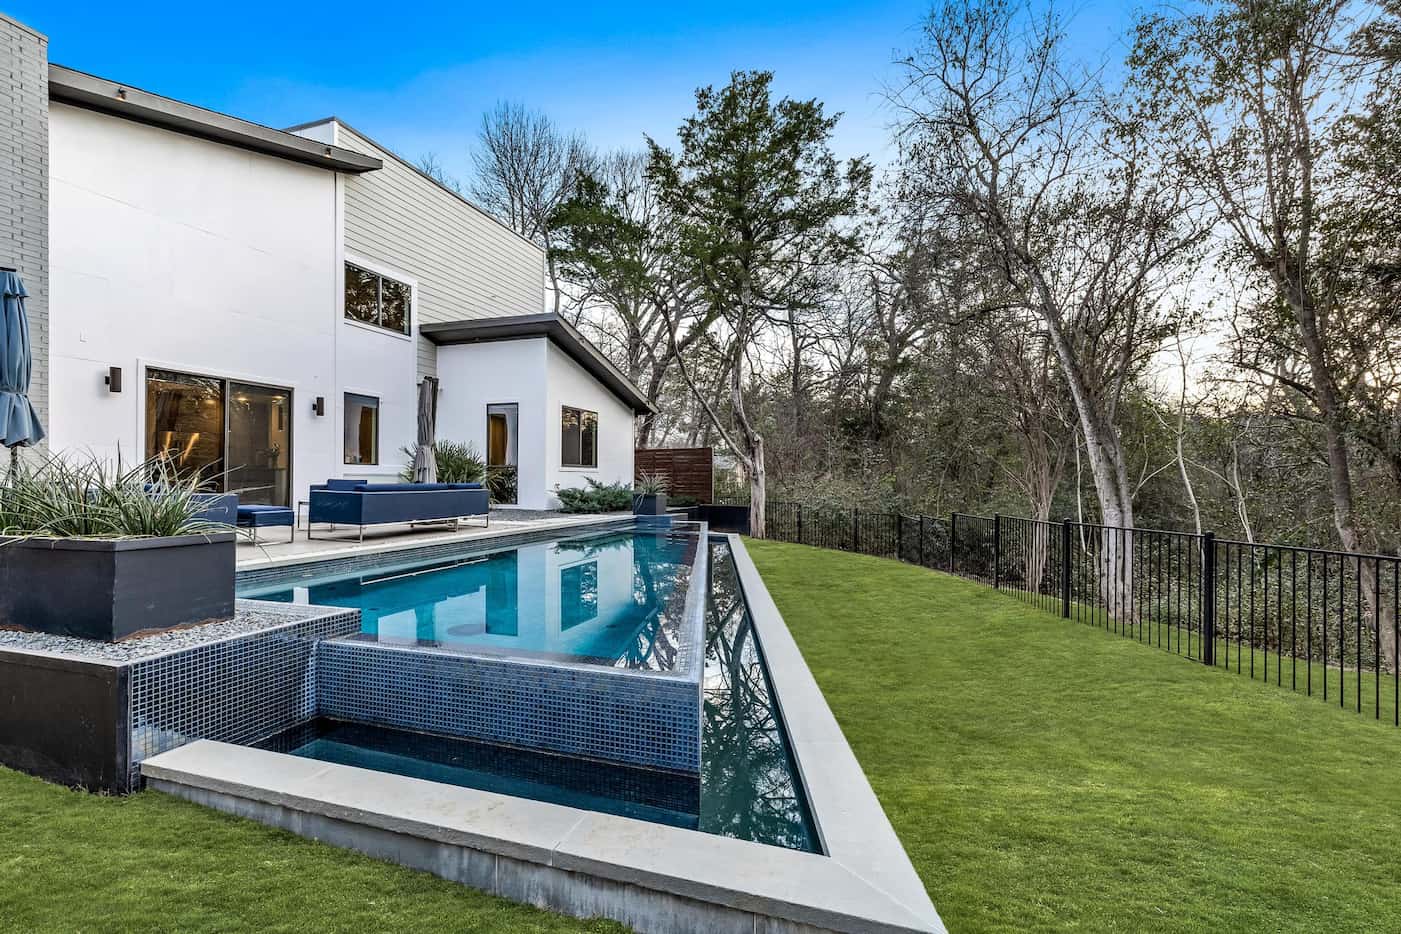 A heated infinity-edge pool looks out to the lush landscaping and wooded creek.